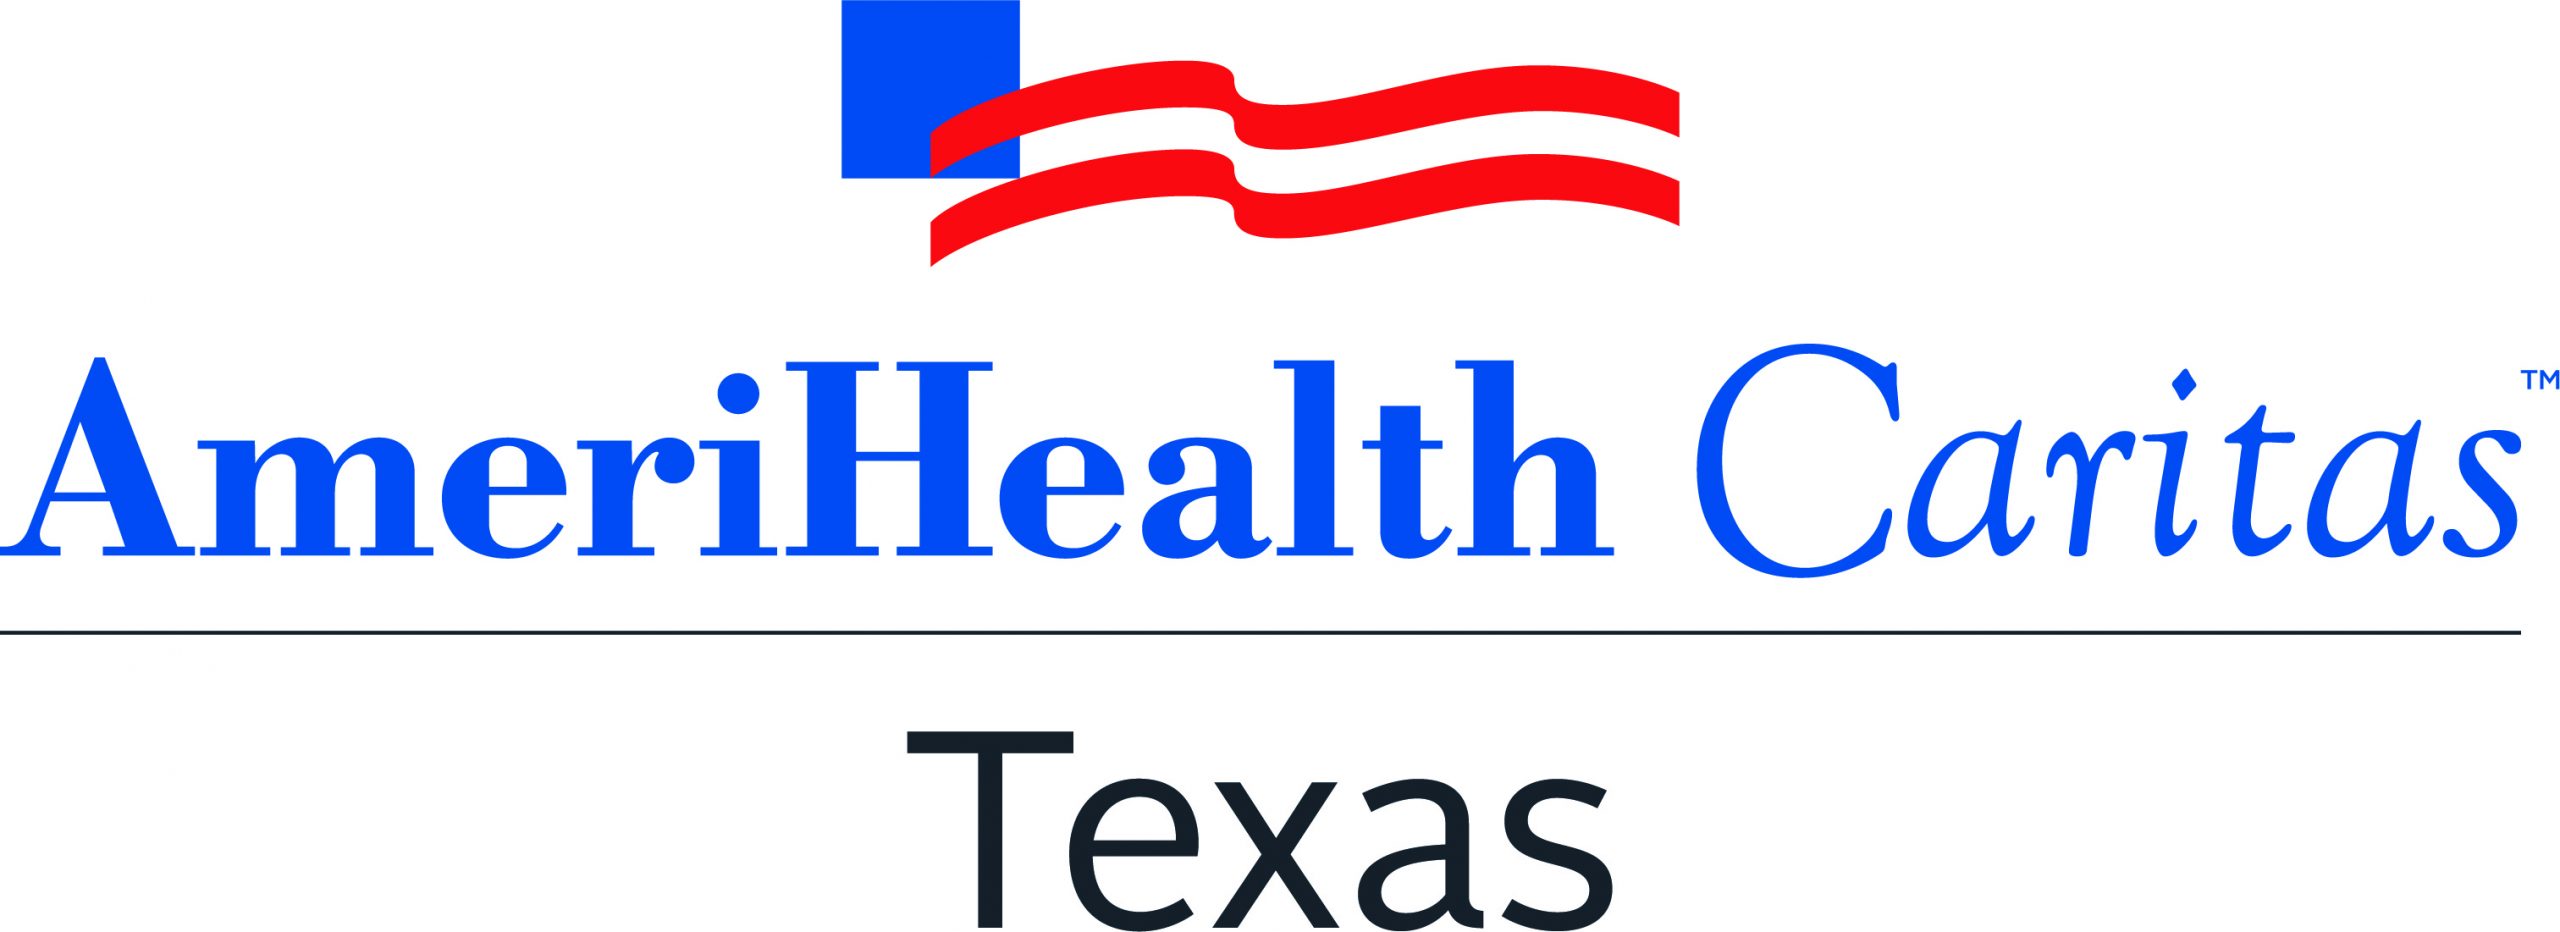 logo for AmeriHealth Caritas Texas, with AmeriHealth in bold blue, Caritas in stylized font with feel of italics above blue line with Texas in black letters below. A stylized US flag flies above the logo